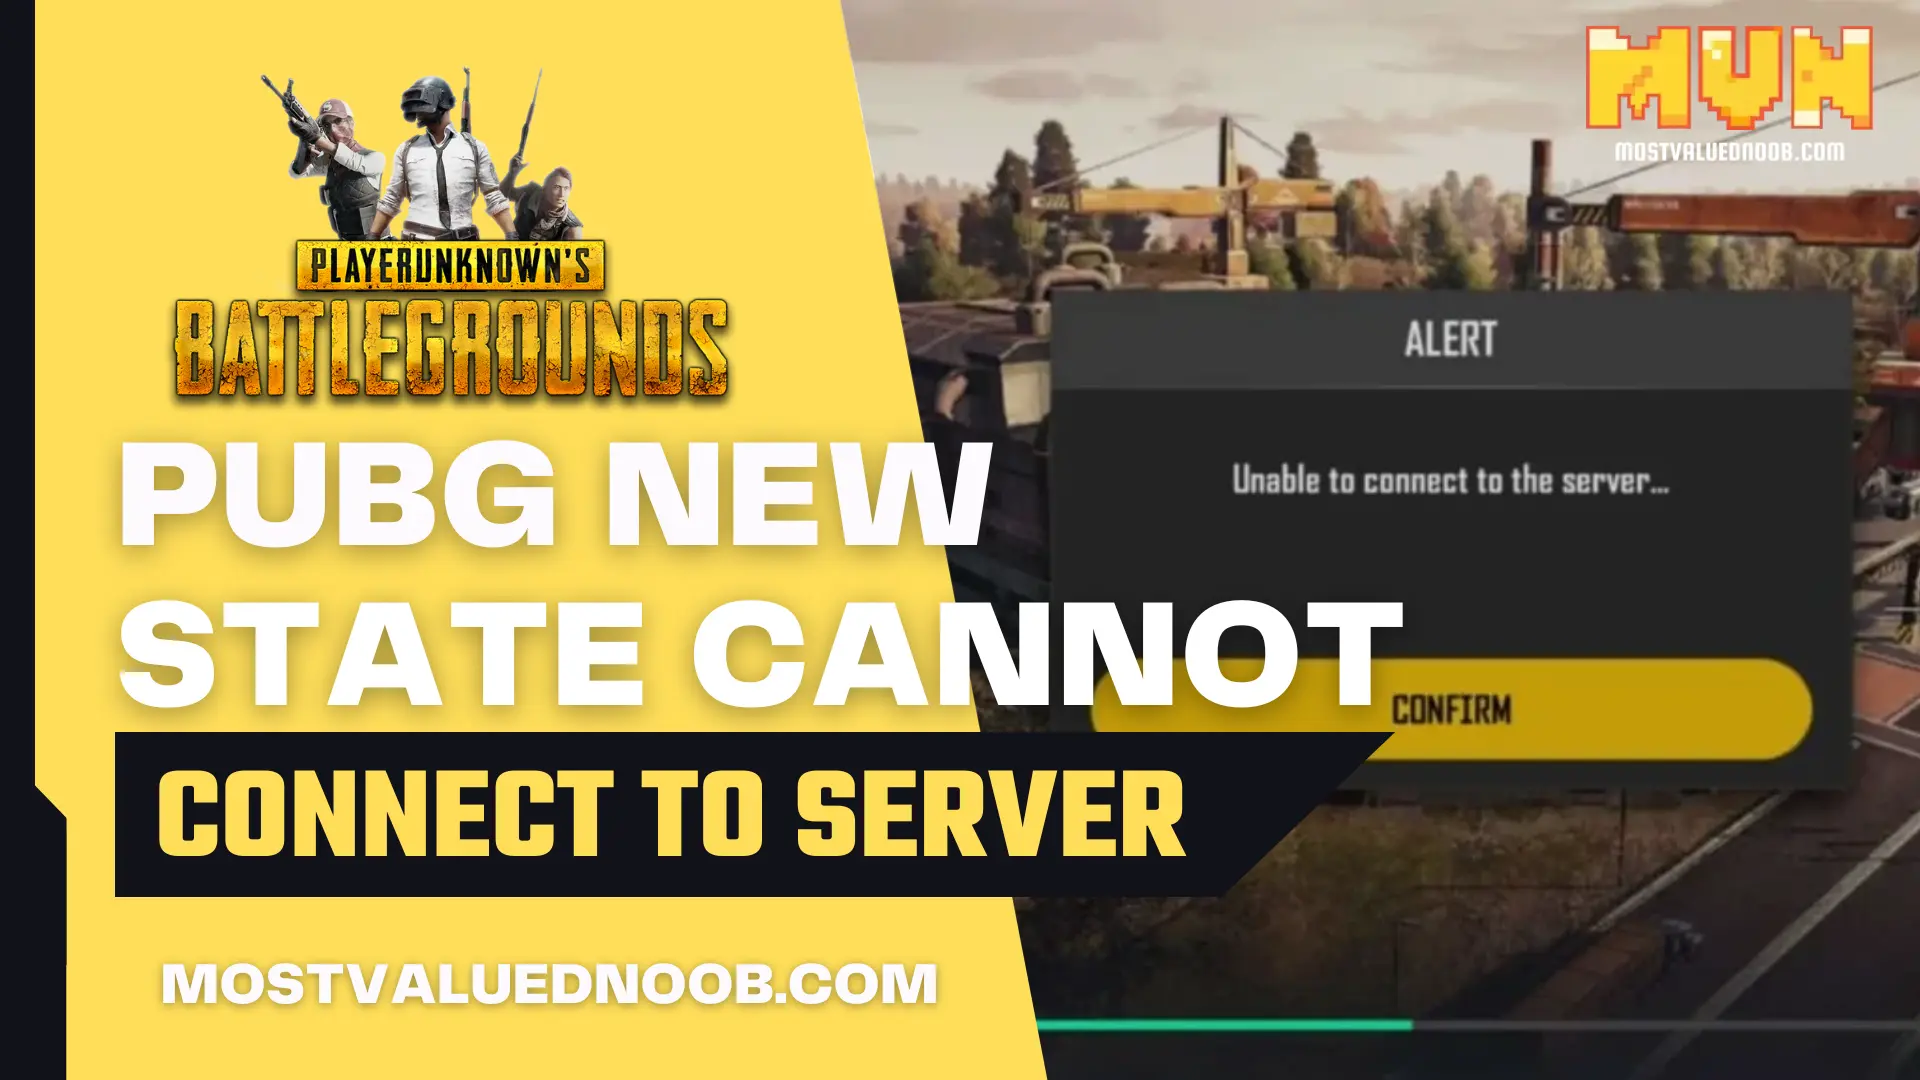 Pubg New State Cannot Connect to Server